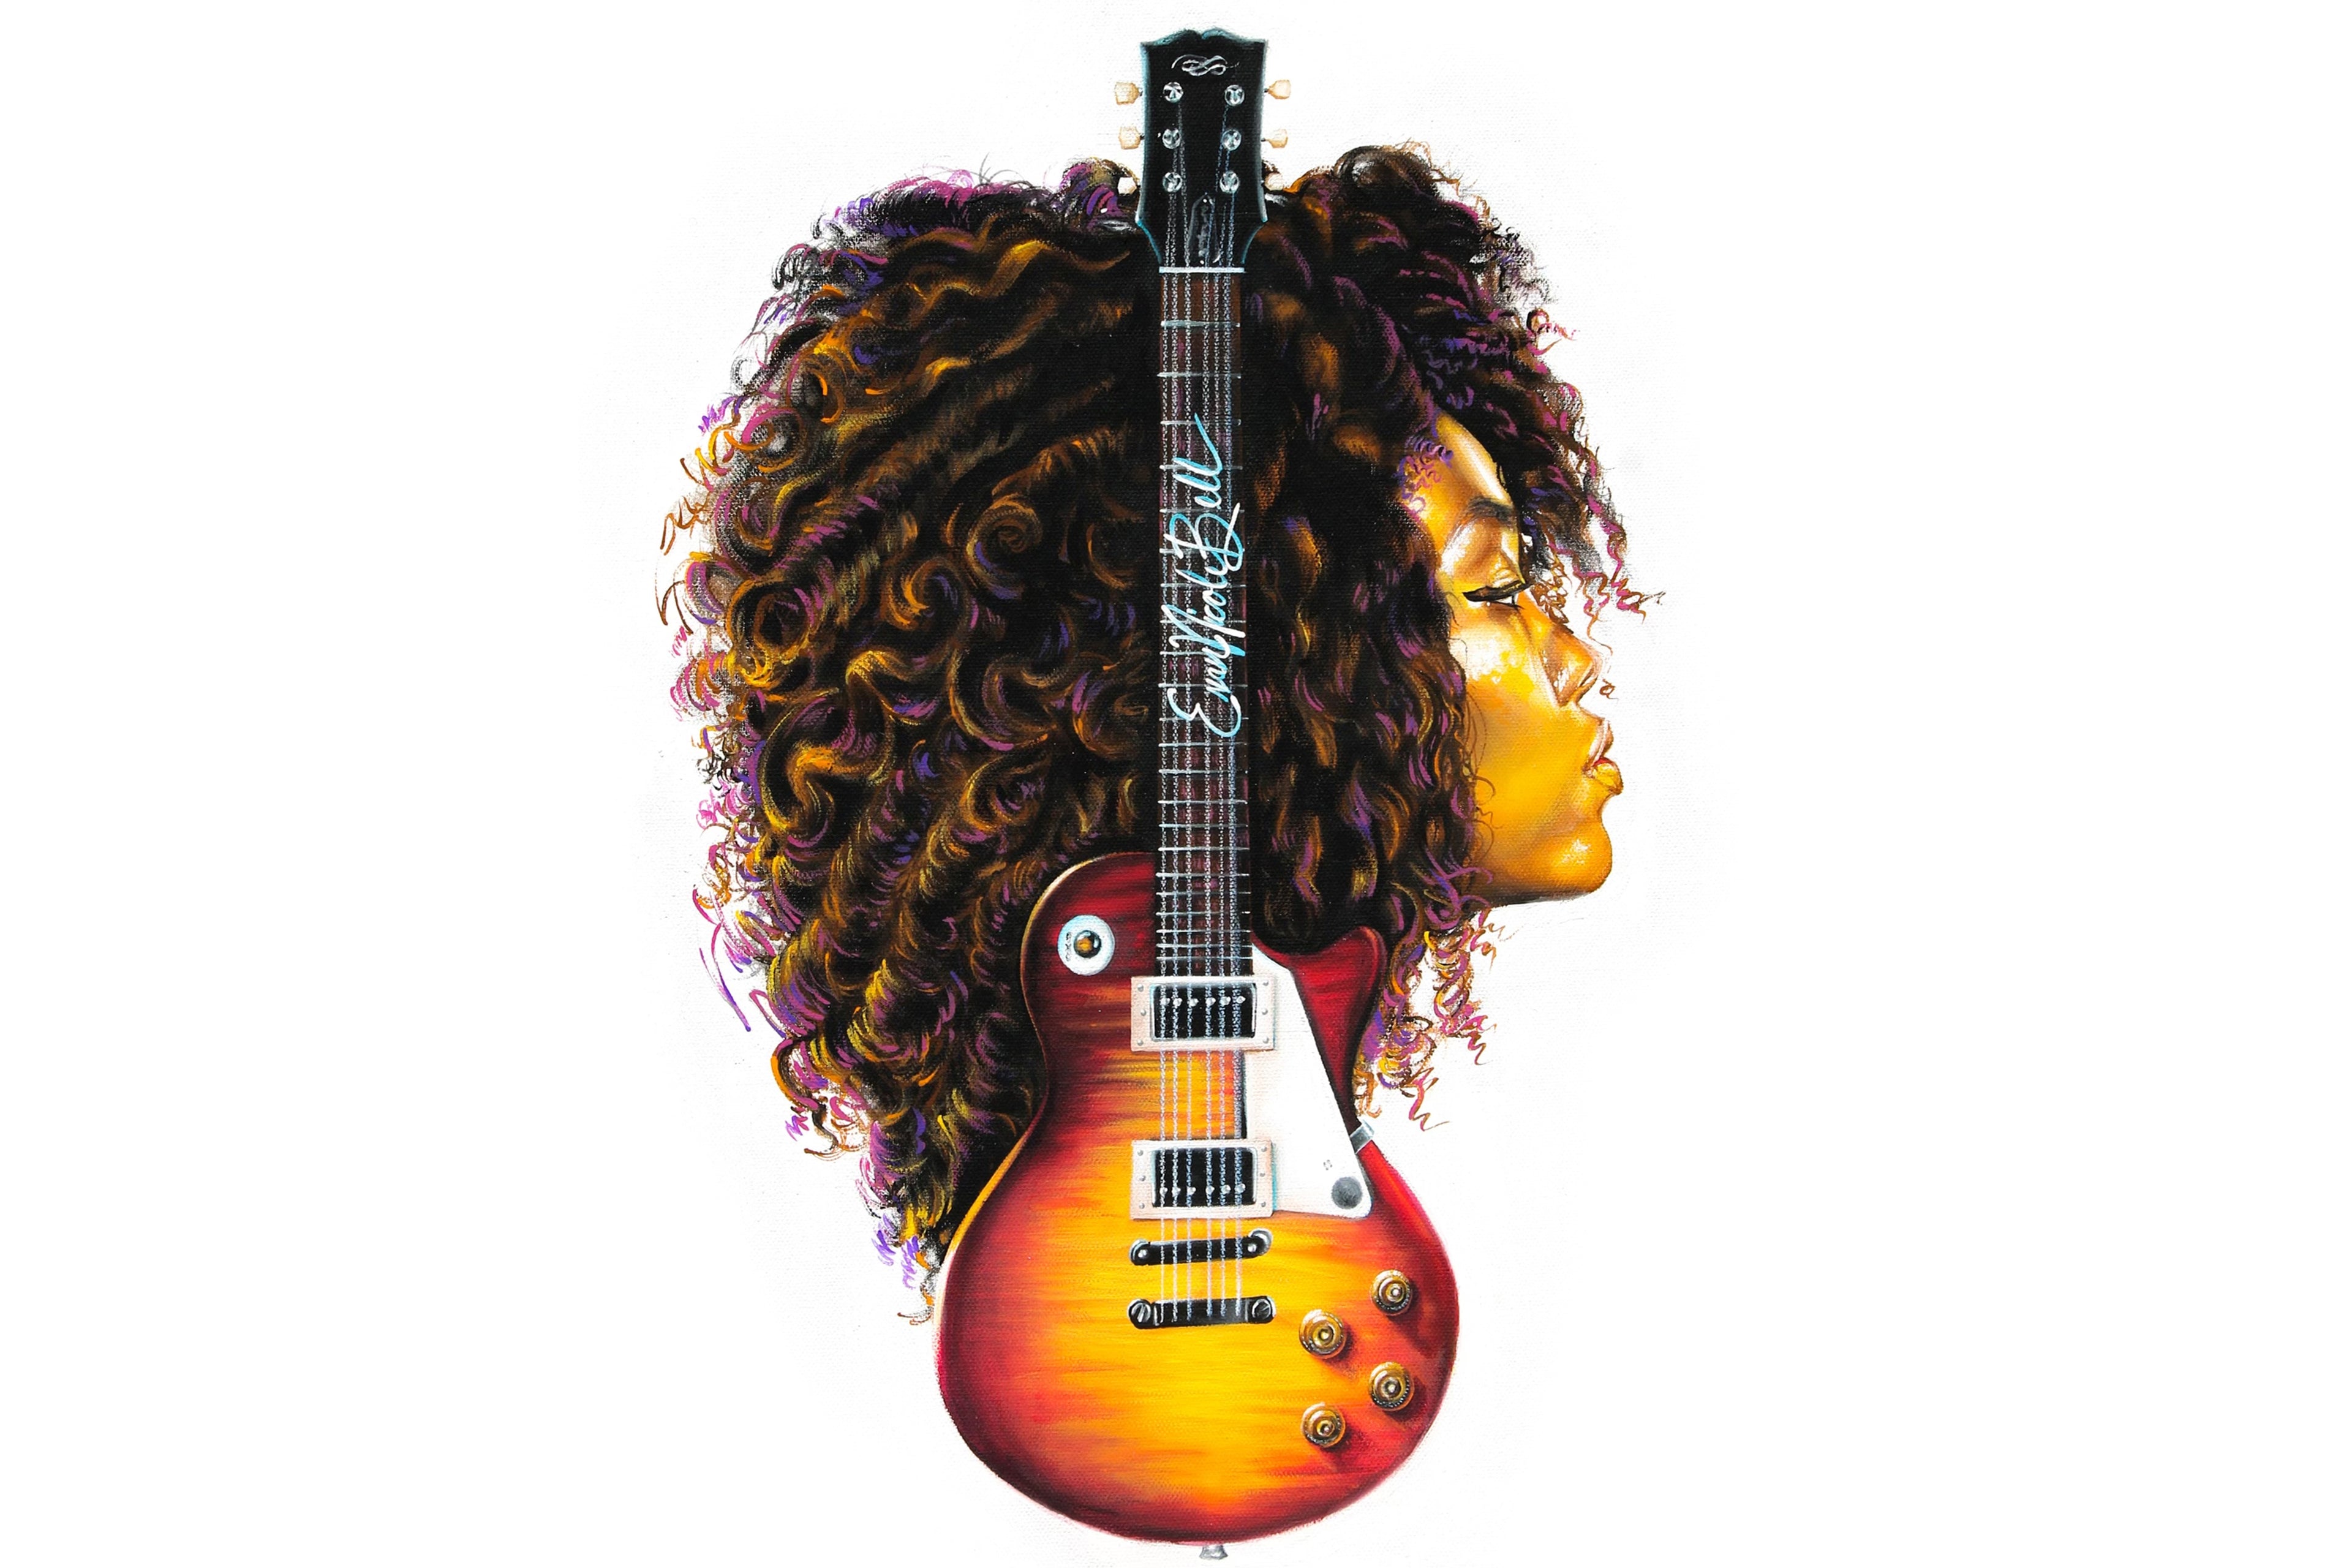 Album art for Evan Nicole Bell's debut EP, Runaway Girl. The album art is a hand-painted acrylic portrait by Baltimore artist G.Pack. It features Evan's side profile and a Les Paul-style guitar with her signature on the neck.